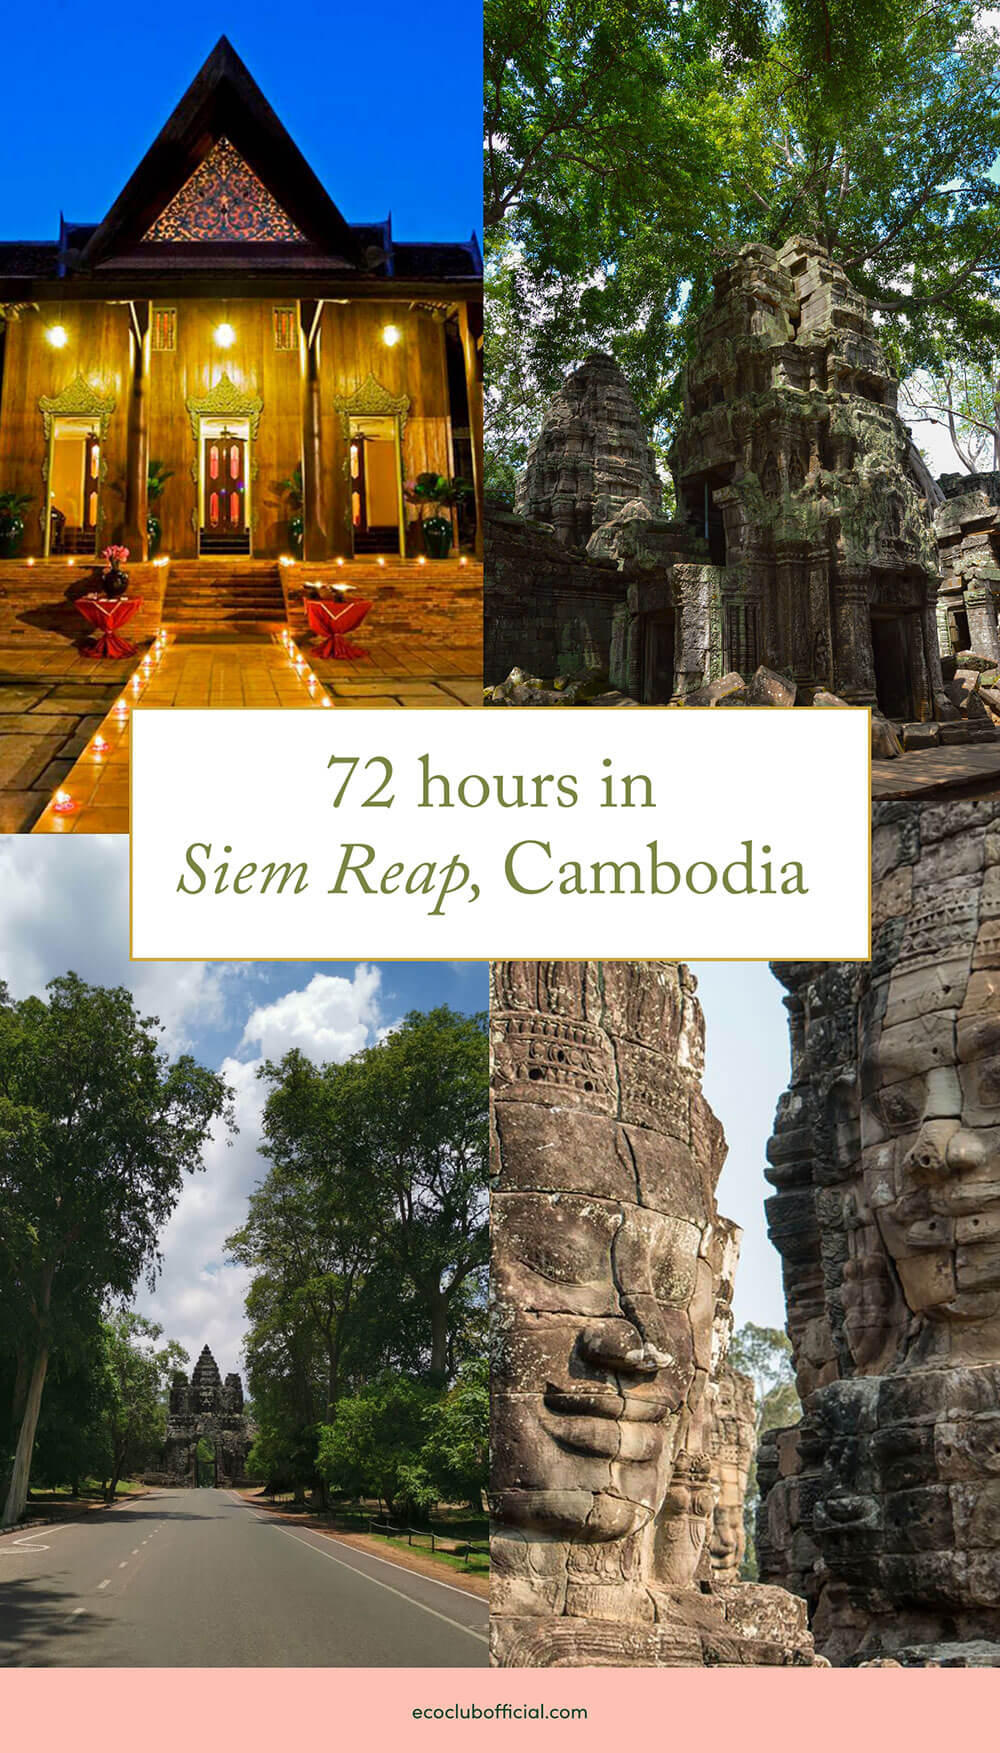 Cambodia Travel Guide to Siem Reap